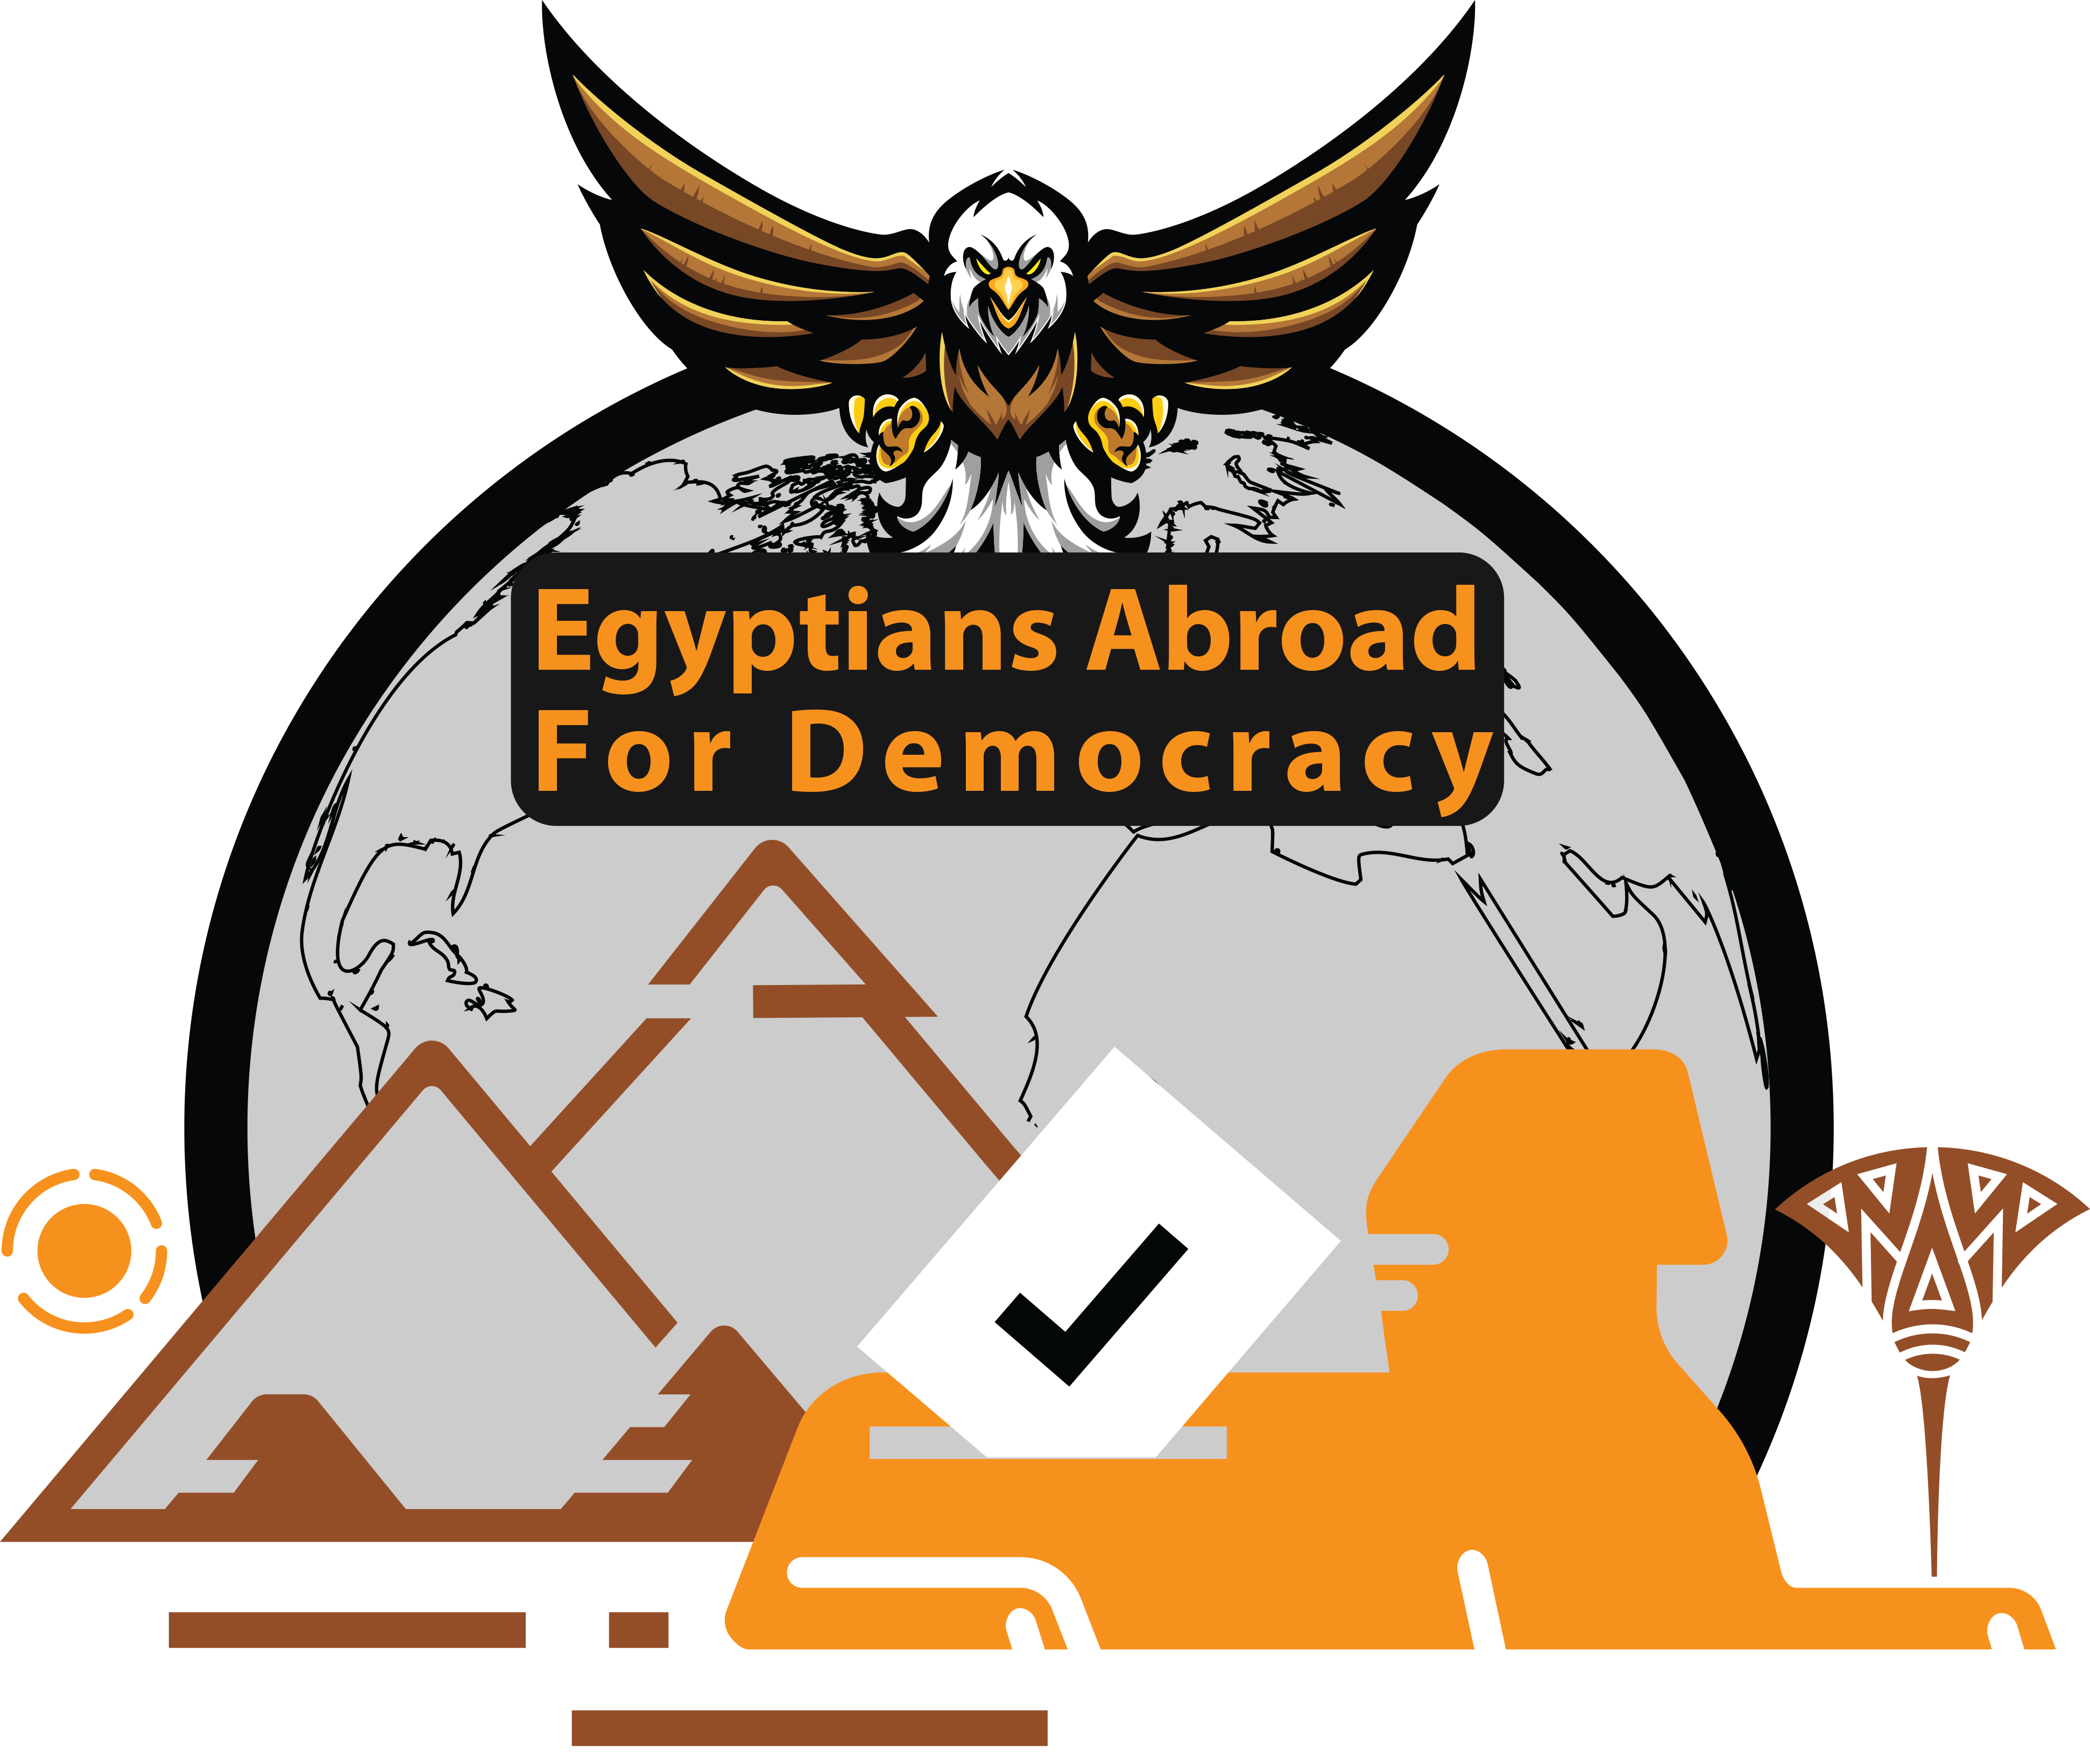 Egyptians Abroad for Democracy